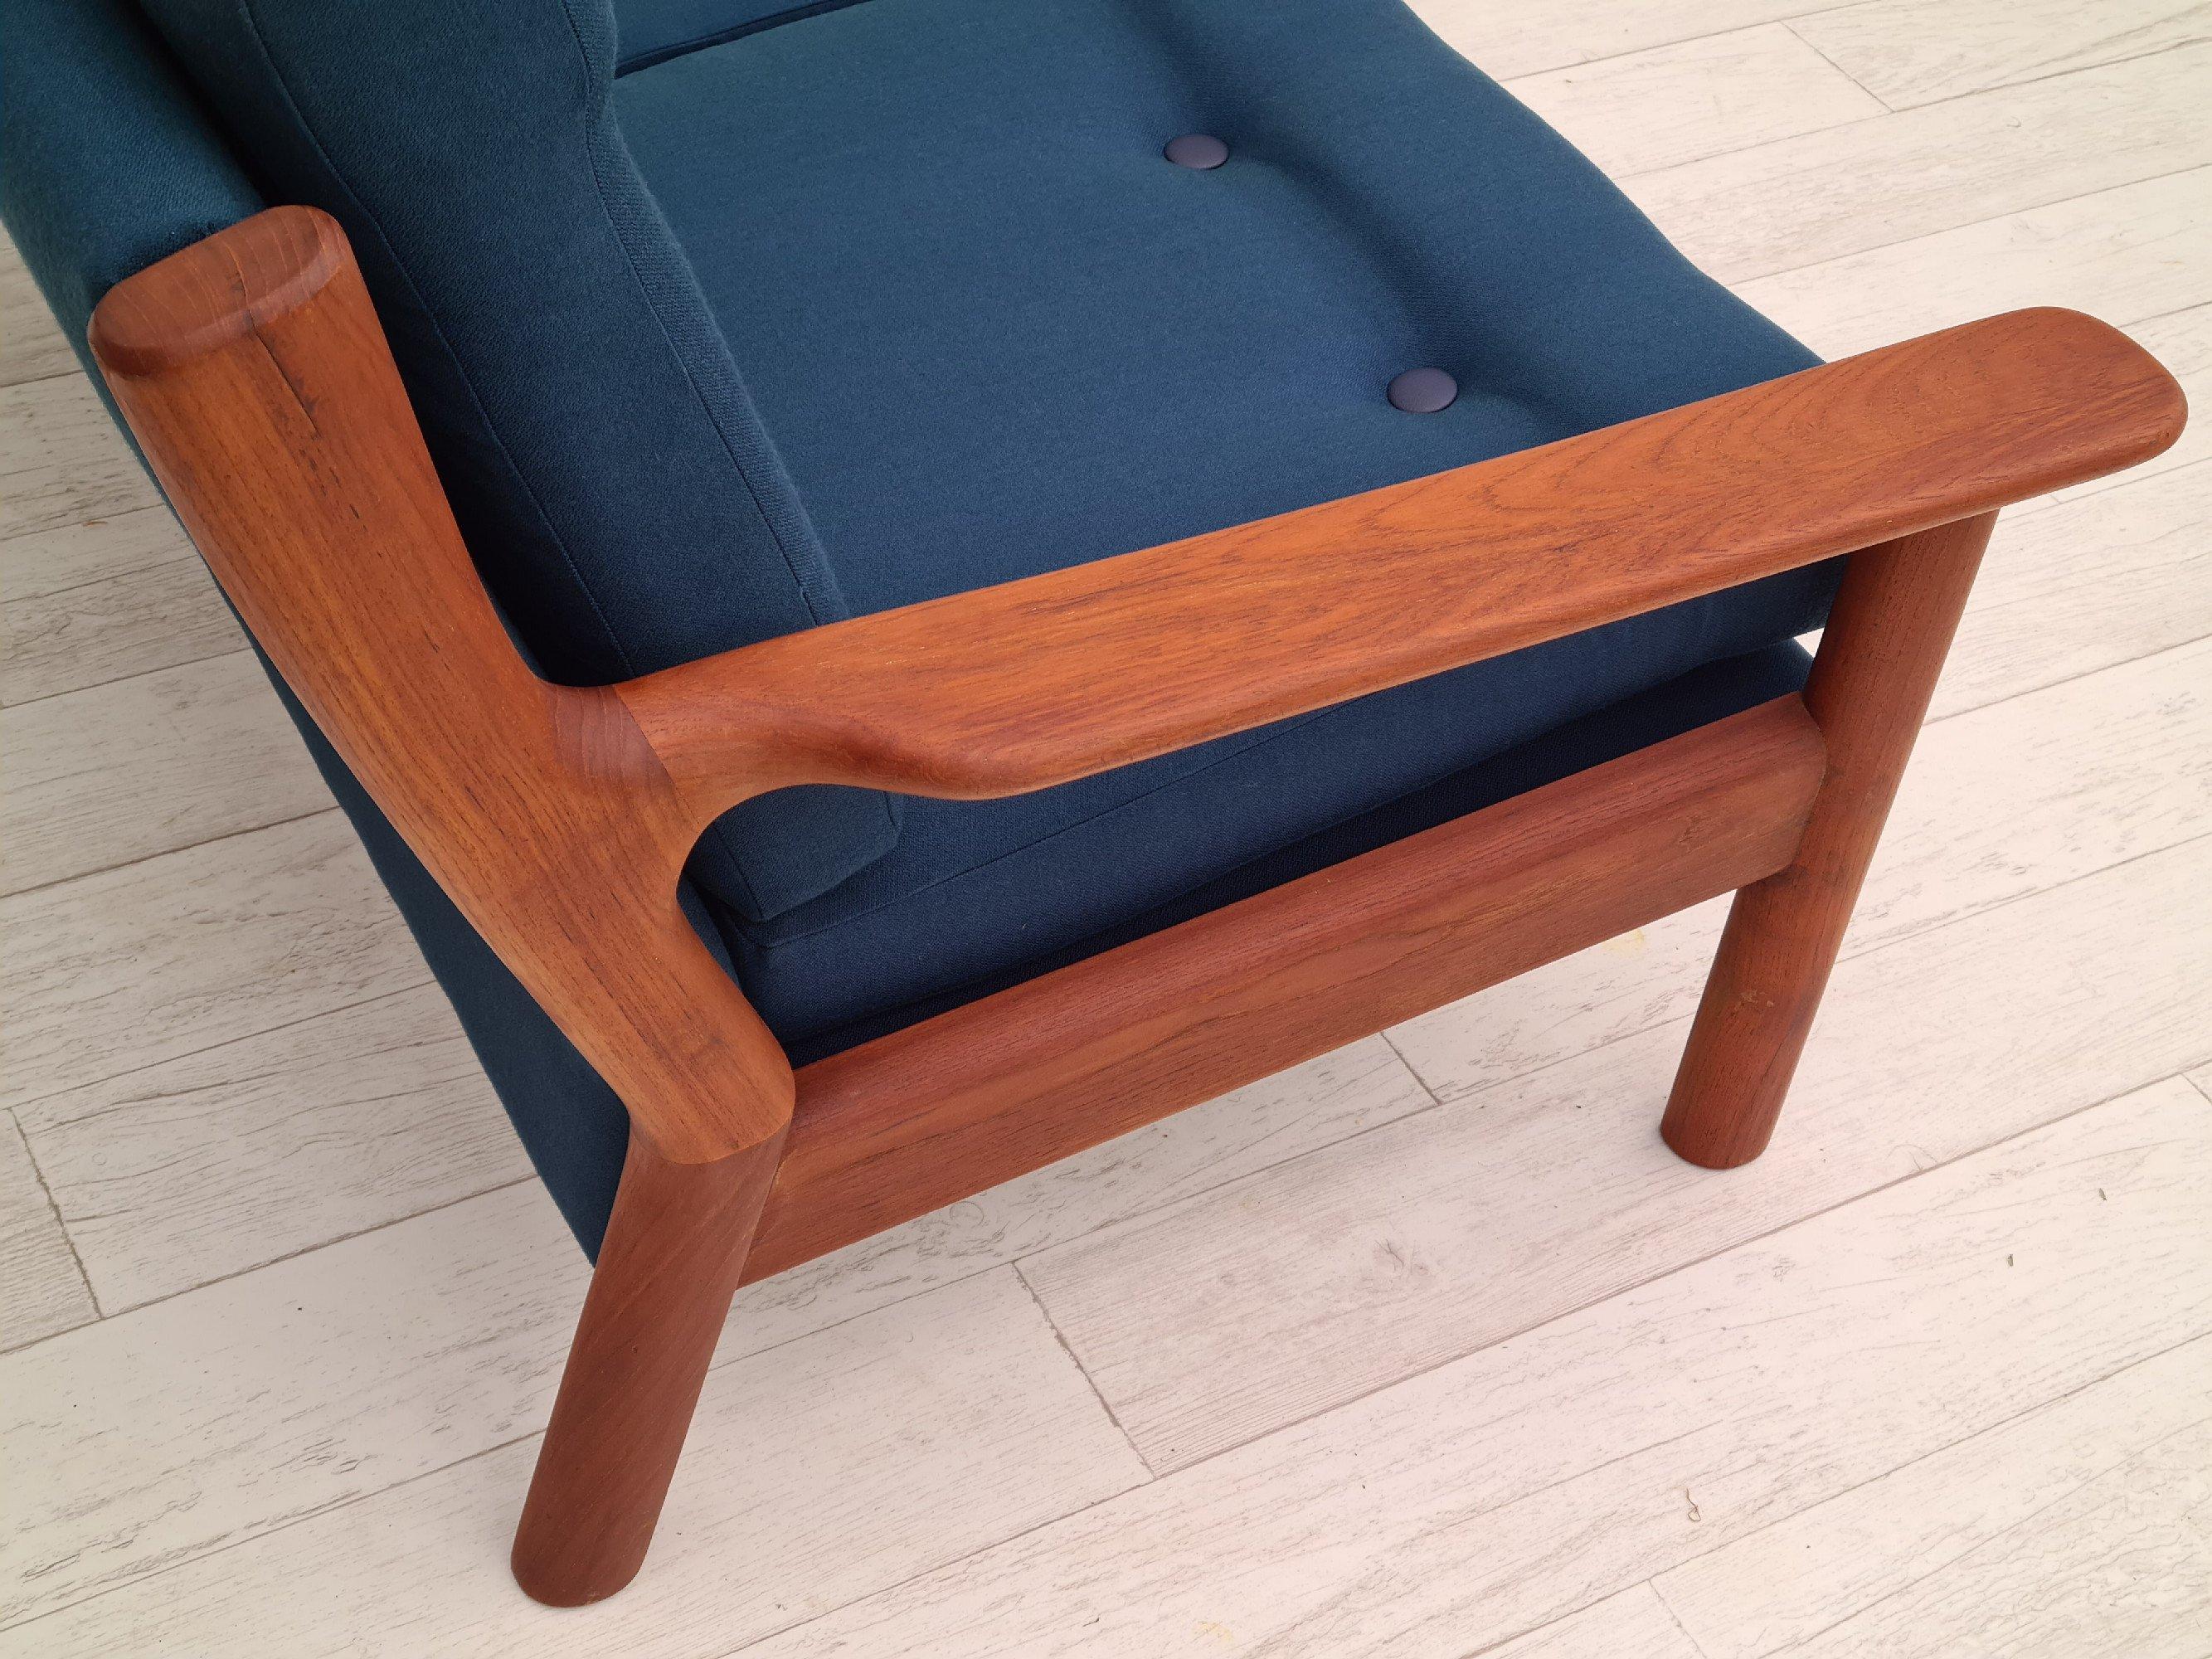 Completely renovated-reupholstered 2 pers. sofa. Scandinavian design. Made in about 1970-75. Armrest / legs of solid teak. Quality navy blue furniture wool fabric, art leather blue buttons. Brand new upholstery, brand new seat cushion. Reupholstered